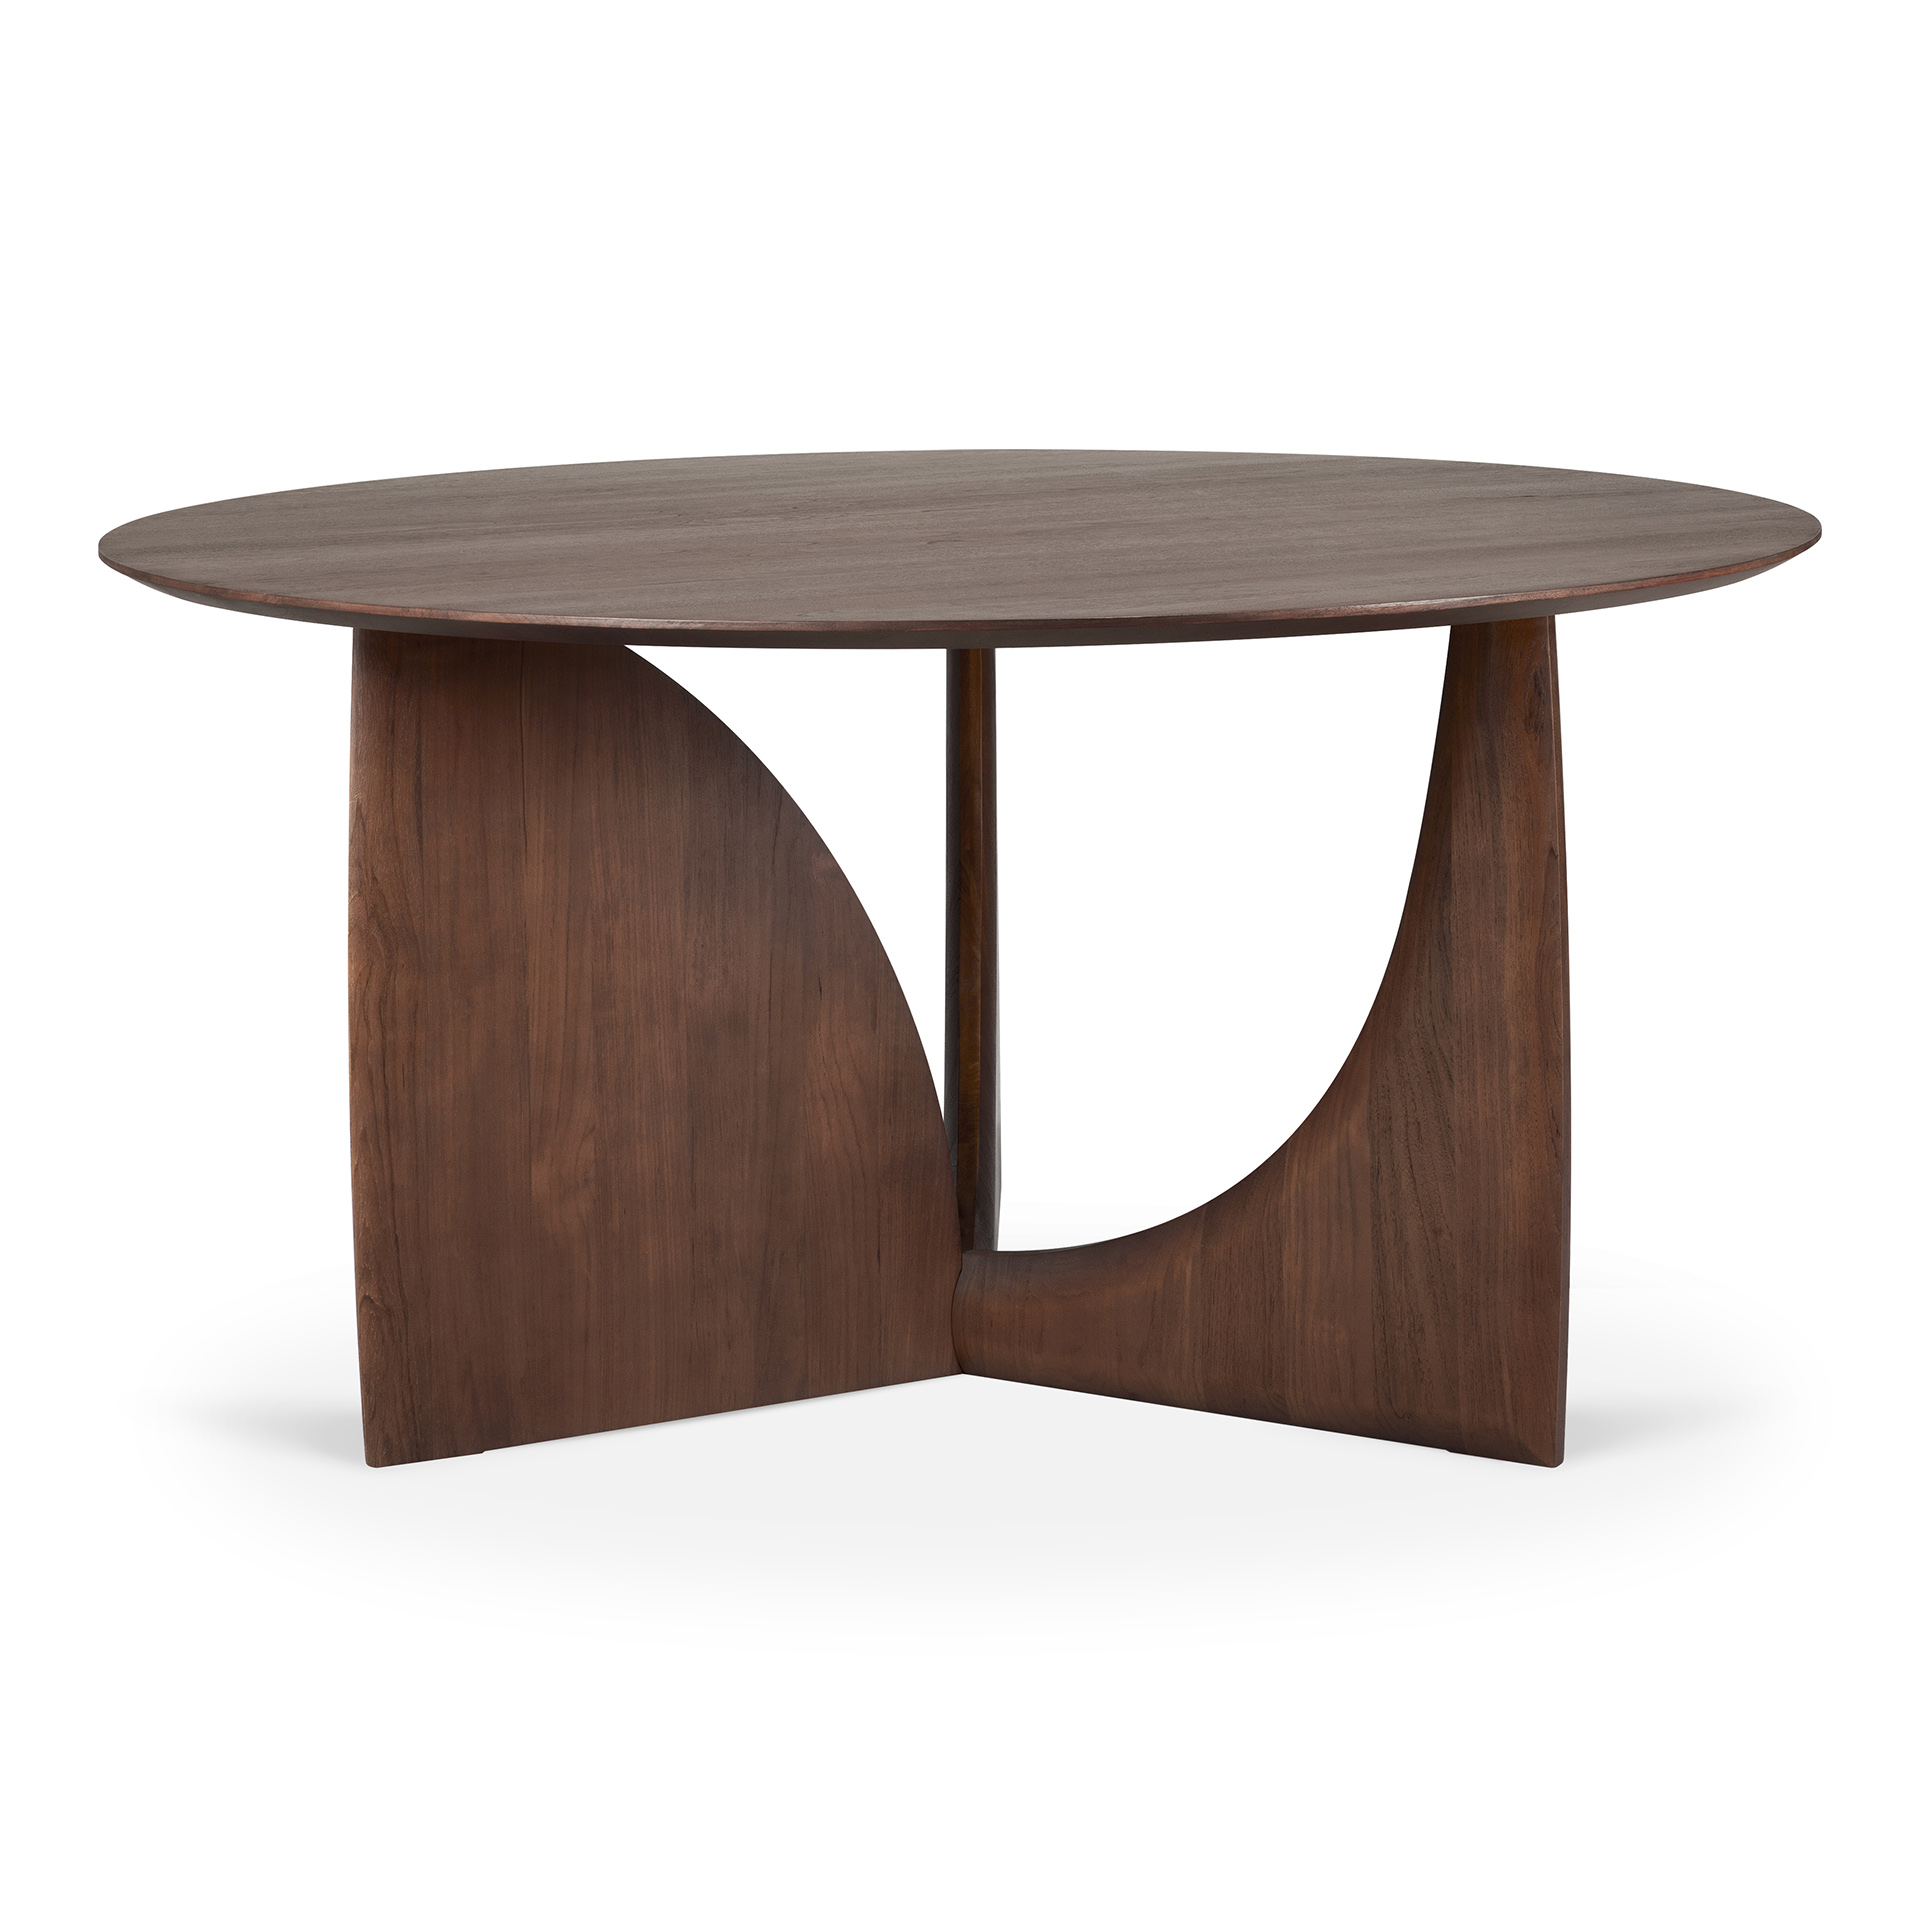 Geometric_dining_table_varnished_teak_brown_round_Ethnicraft